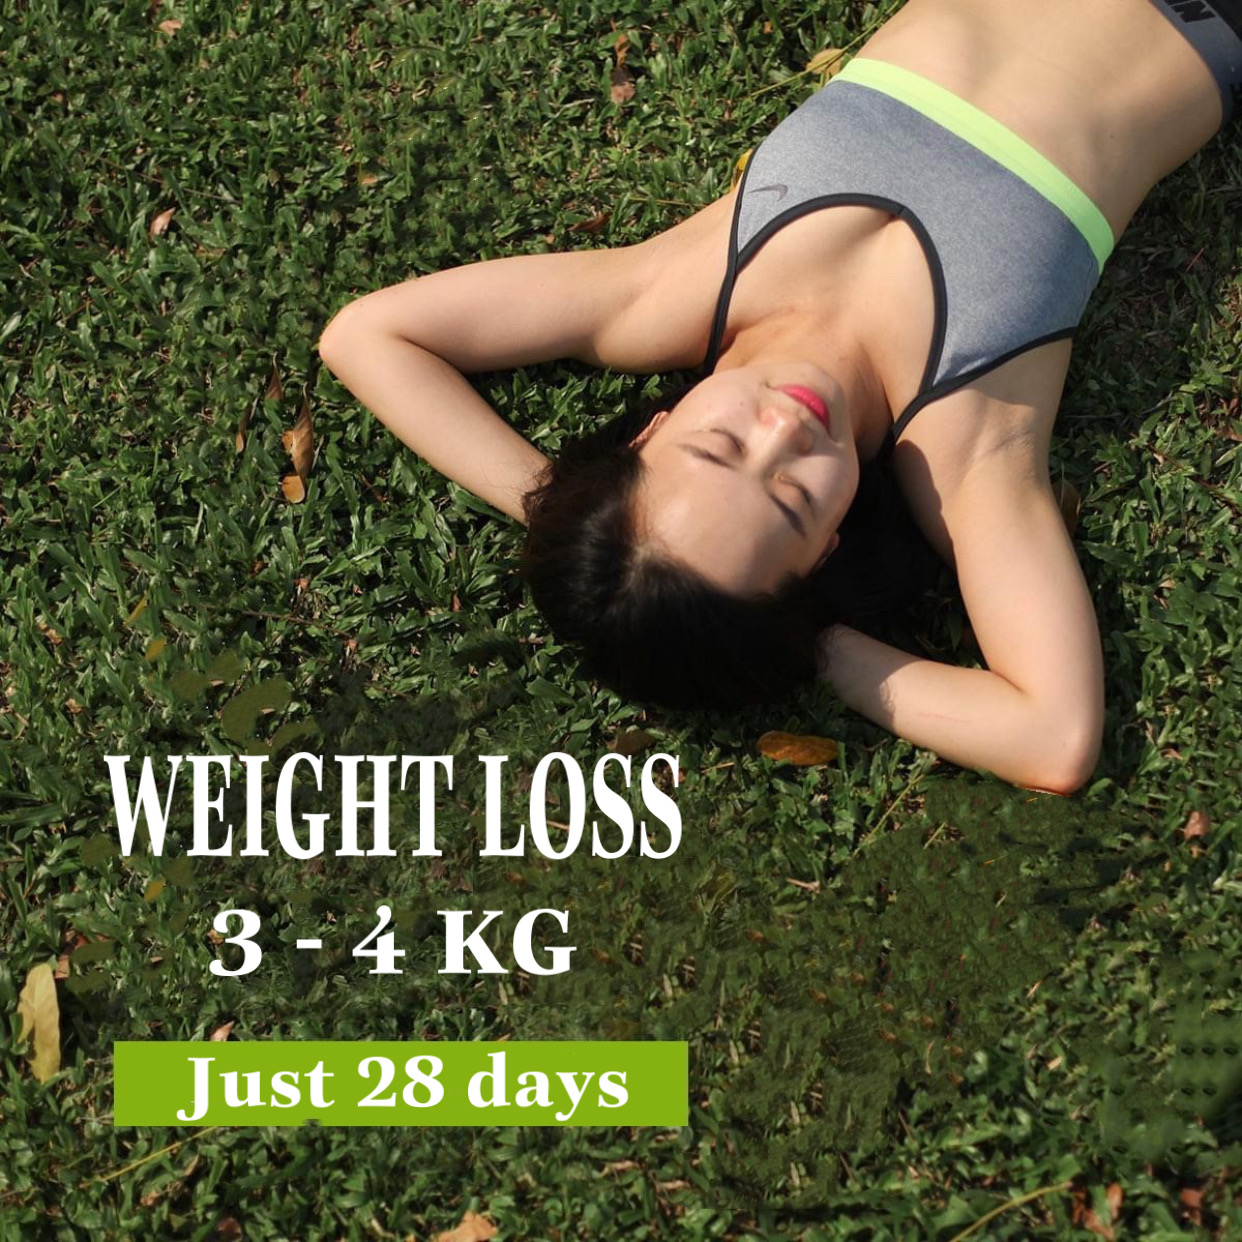 Fruit Detox Tea help to loss weight 3 -4kg after 28 days